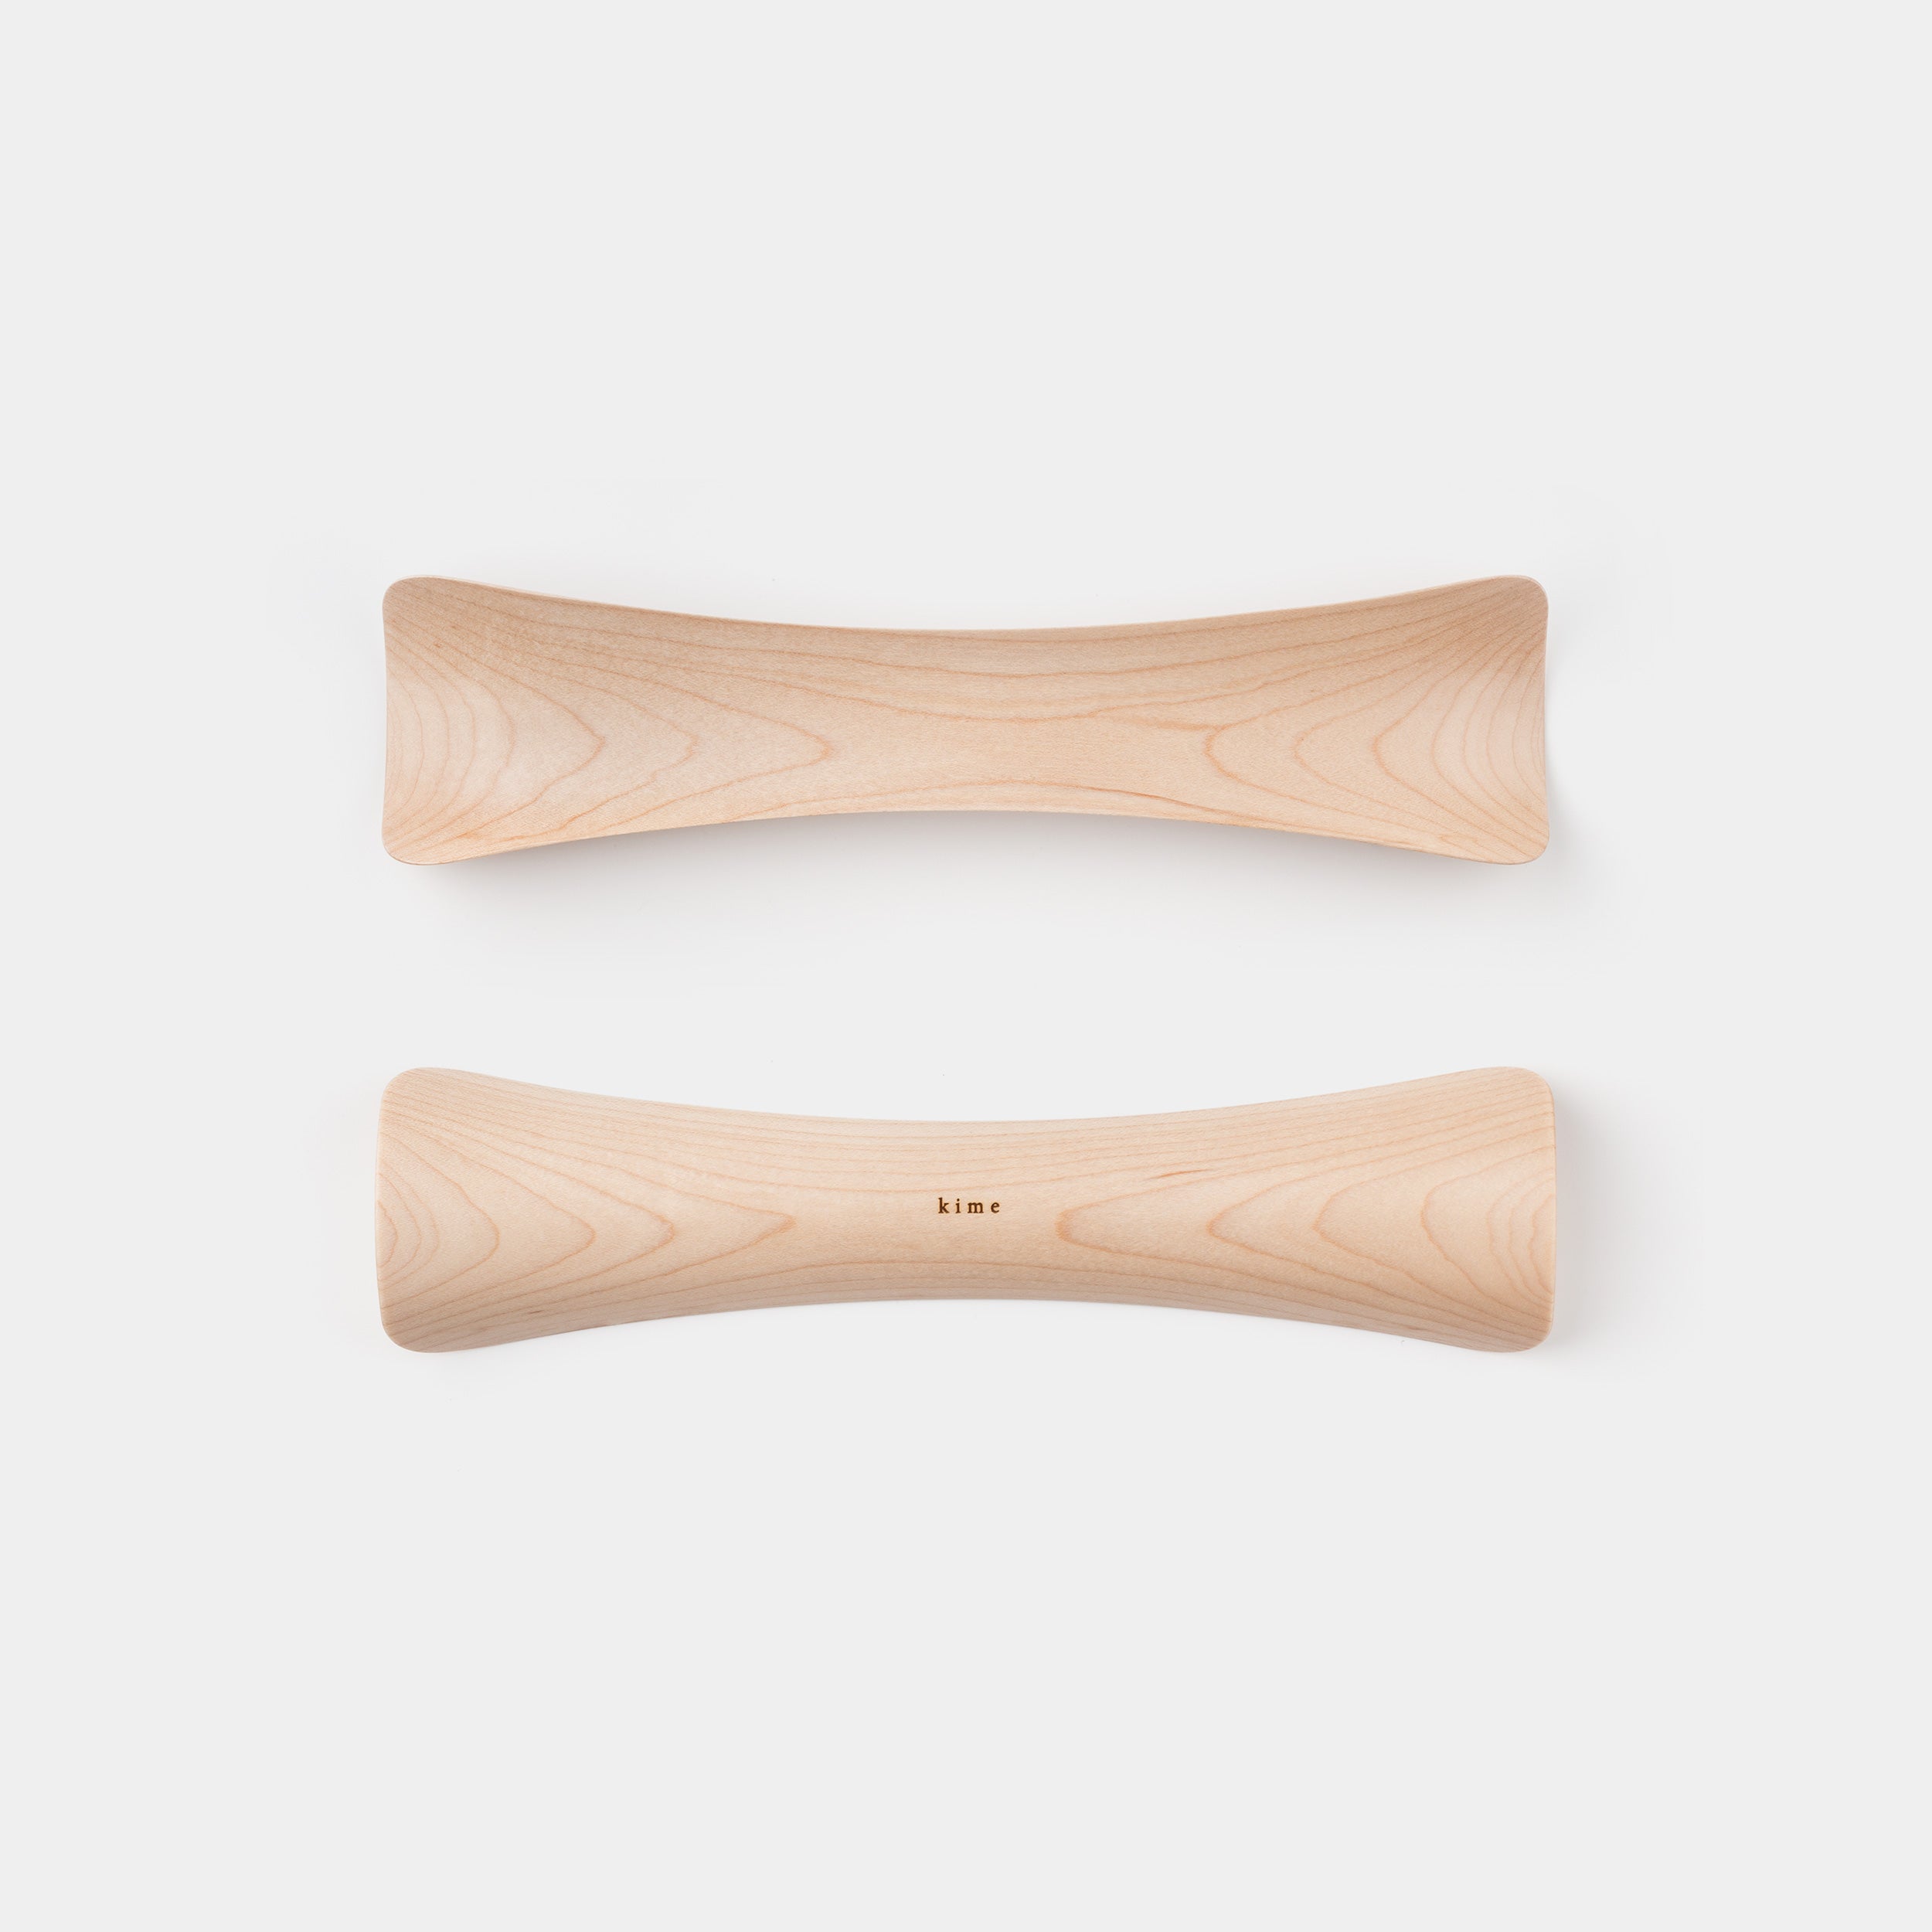 Kime Shoe Horn Maple top and bottom